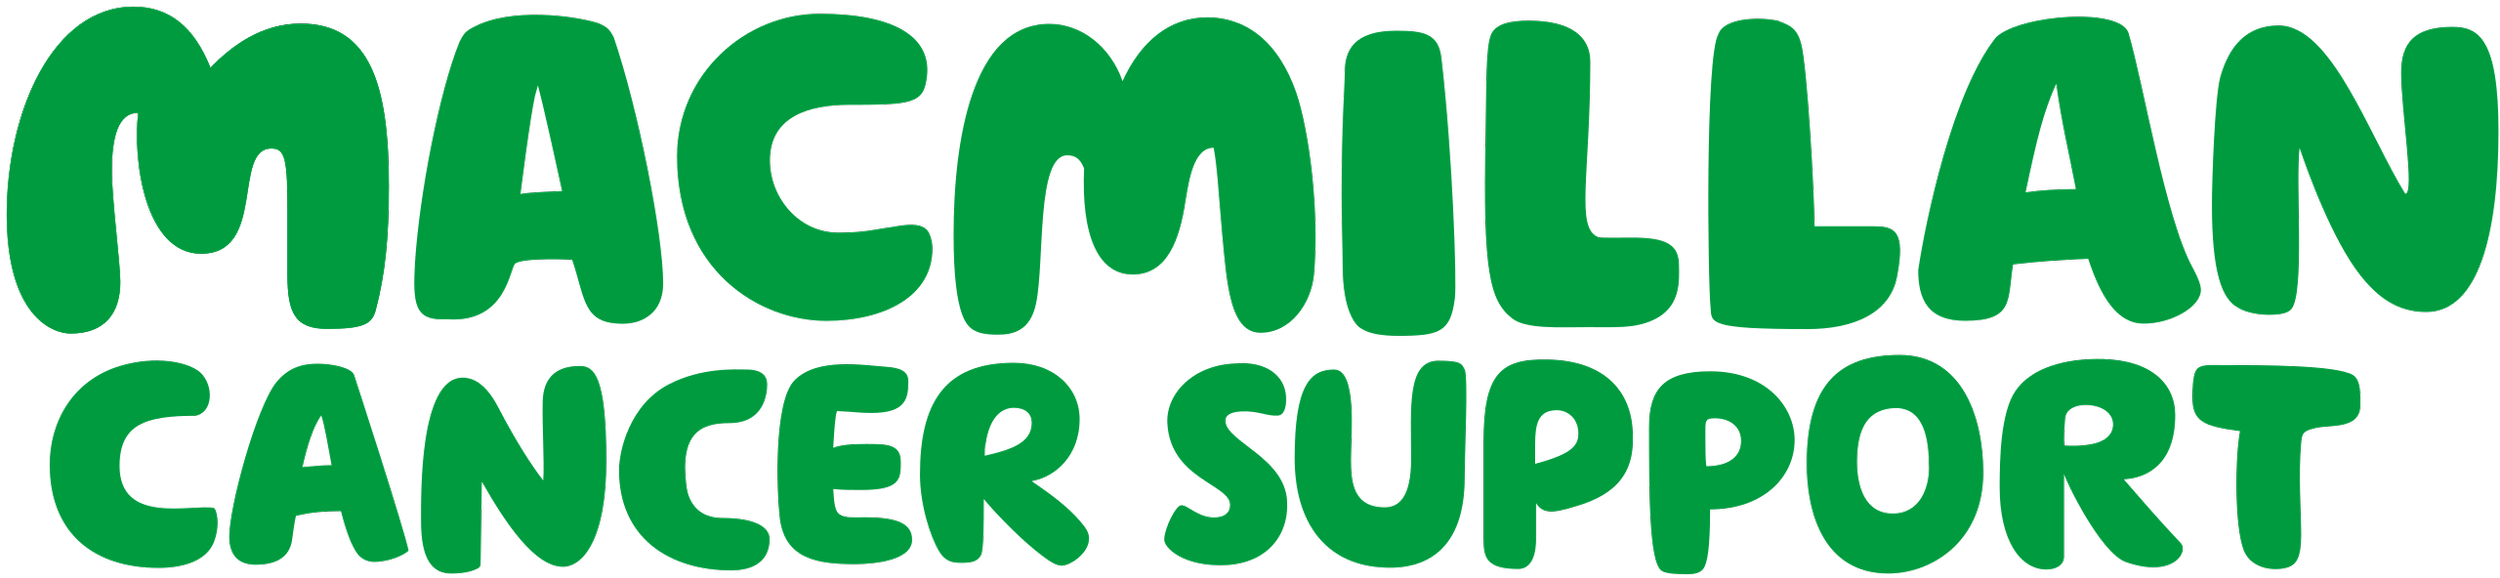 2560px-Macmillan_Cancer_Support_logo.svg.png